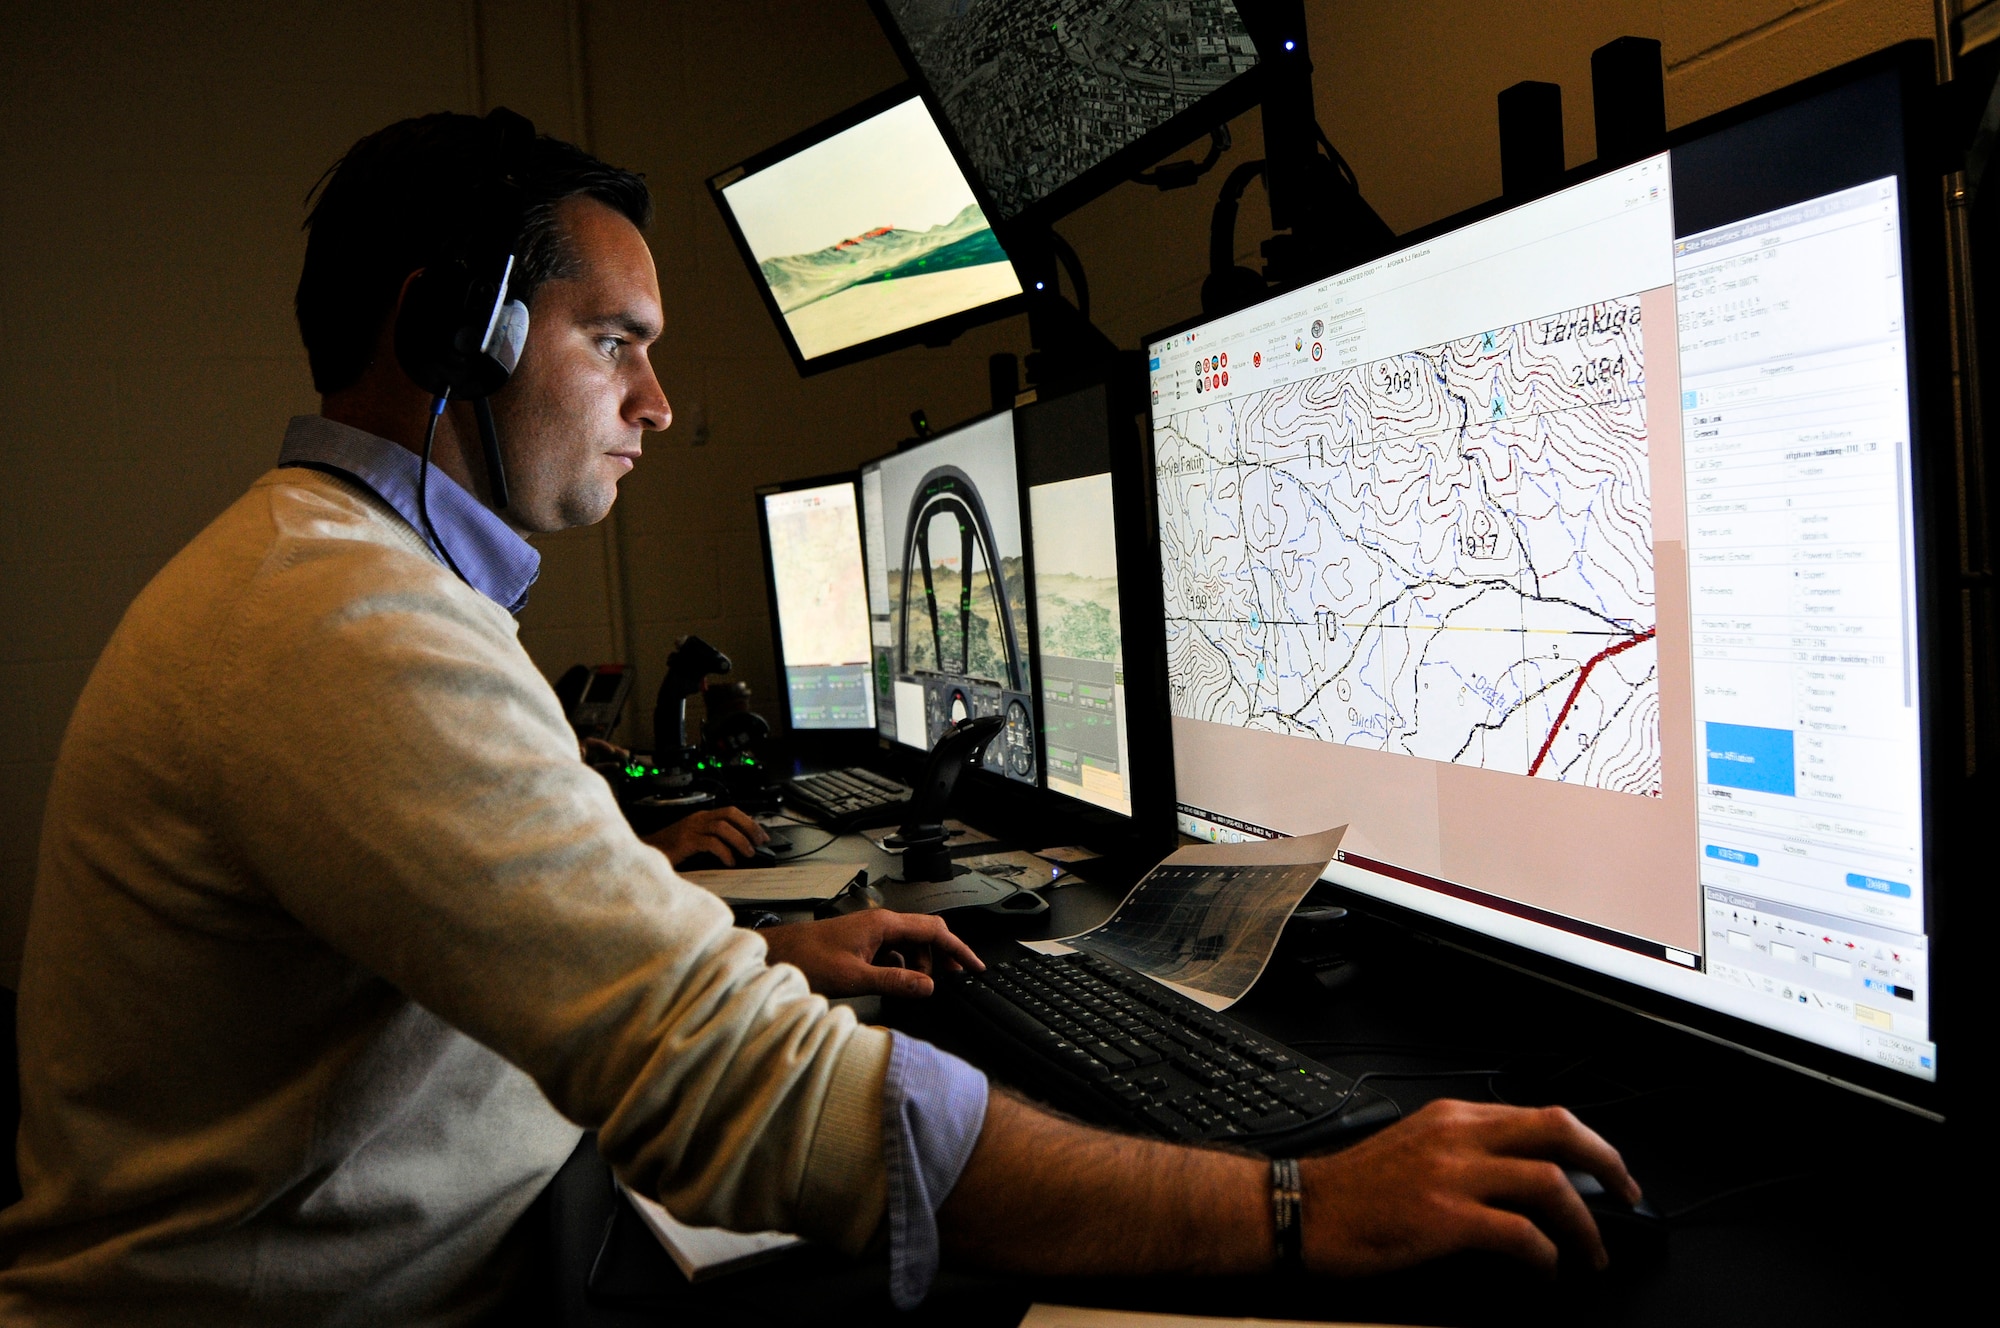 Nathan A. Hruska, simulator operator and maintainer for the 169th Air Support Operations Squadron, Illinois Air National Guard, programs a scenario in the Air National Guard Advanced Joint Terminal Attack Controller Training System during a training session at the 182nd Airlift Wing in Peoria, Ill., Oct. 5, 2015. Peoria’s TACPs teamed up with the QuantaDyn Corporation to help create the AAJTS, which is expected to potentially save the government $95 million through fiscal year 2018 by reducing the cost of qualification and continuation training by 48 percent. (U.S. Air National Guard photo by Staff Sgt. Lealan Buehrer/Released)